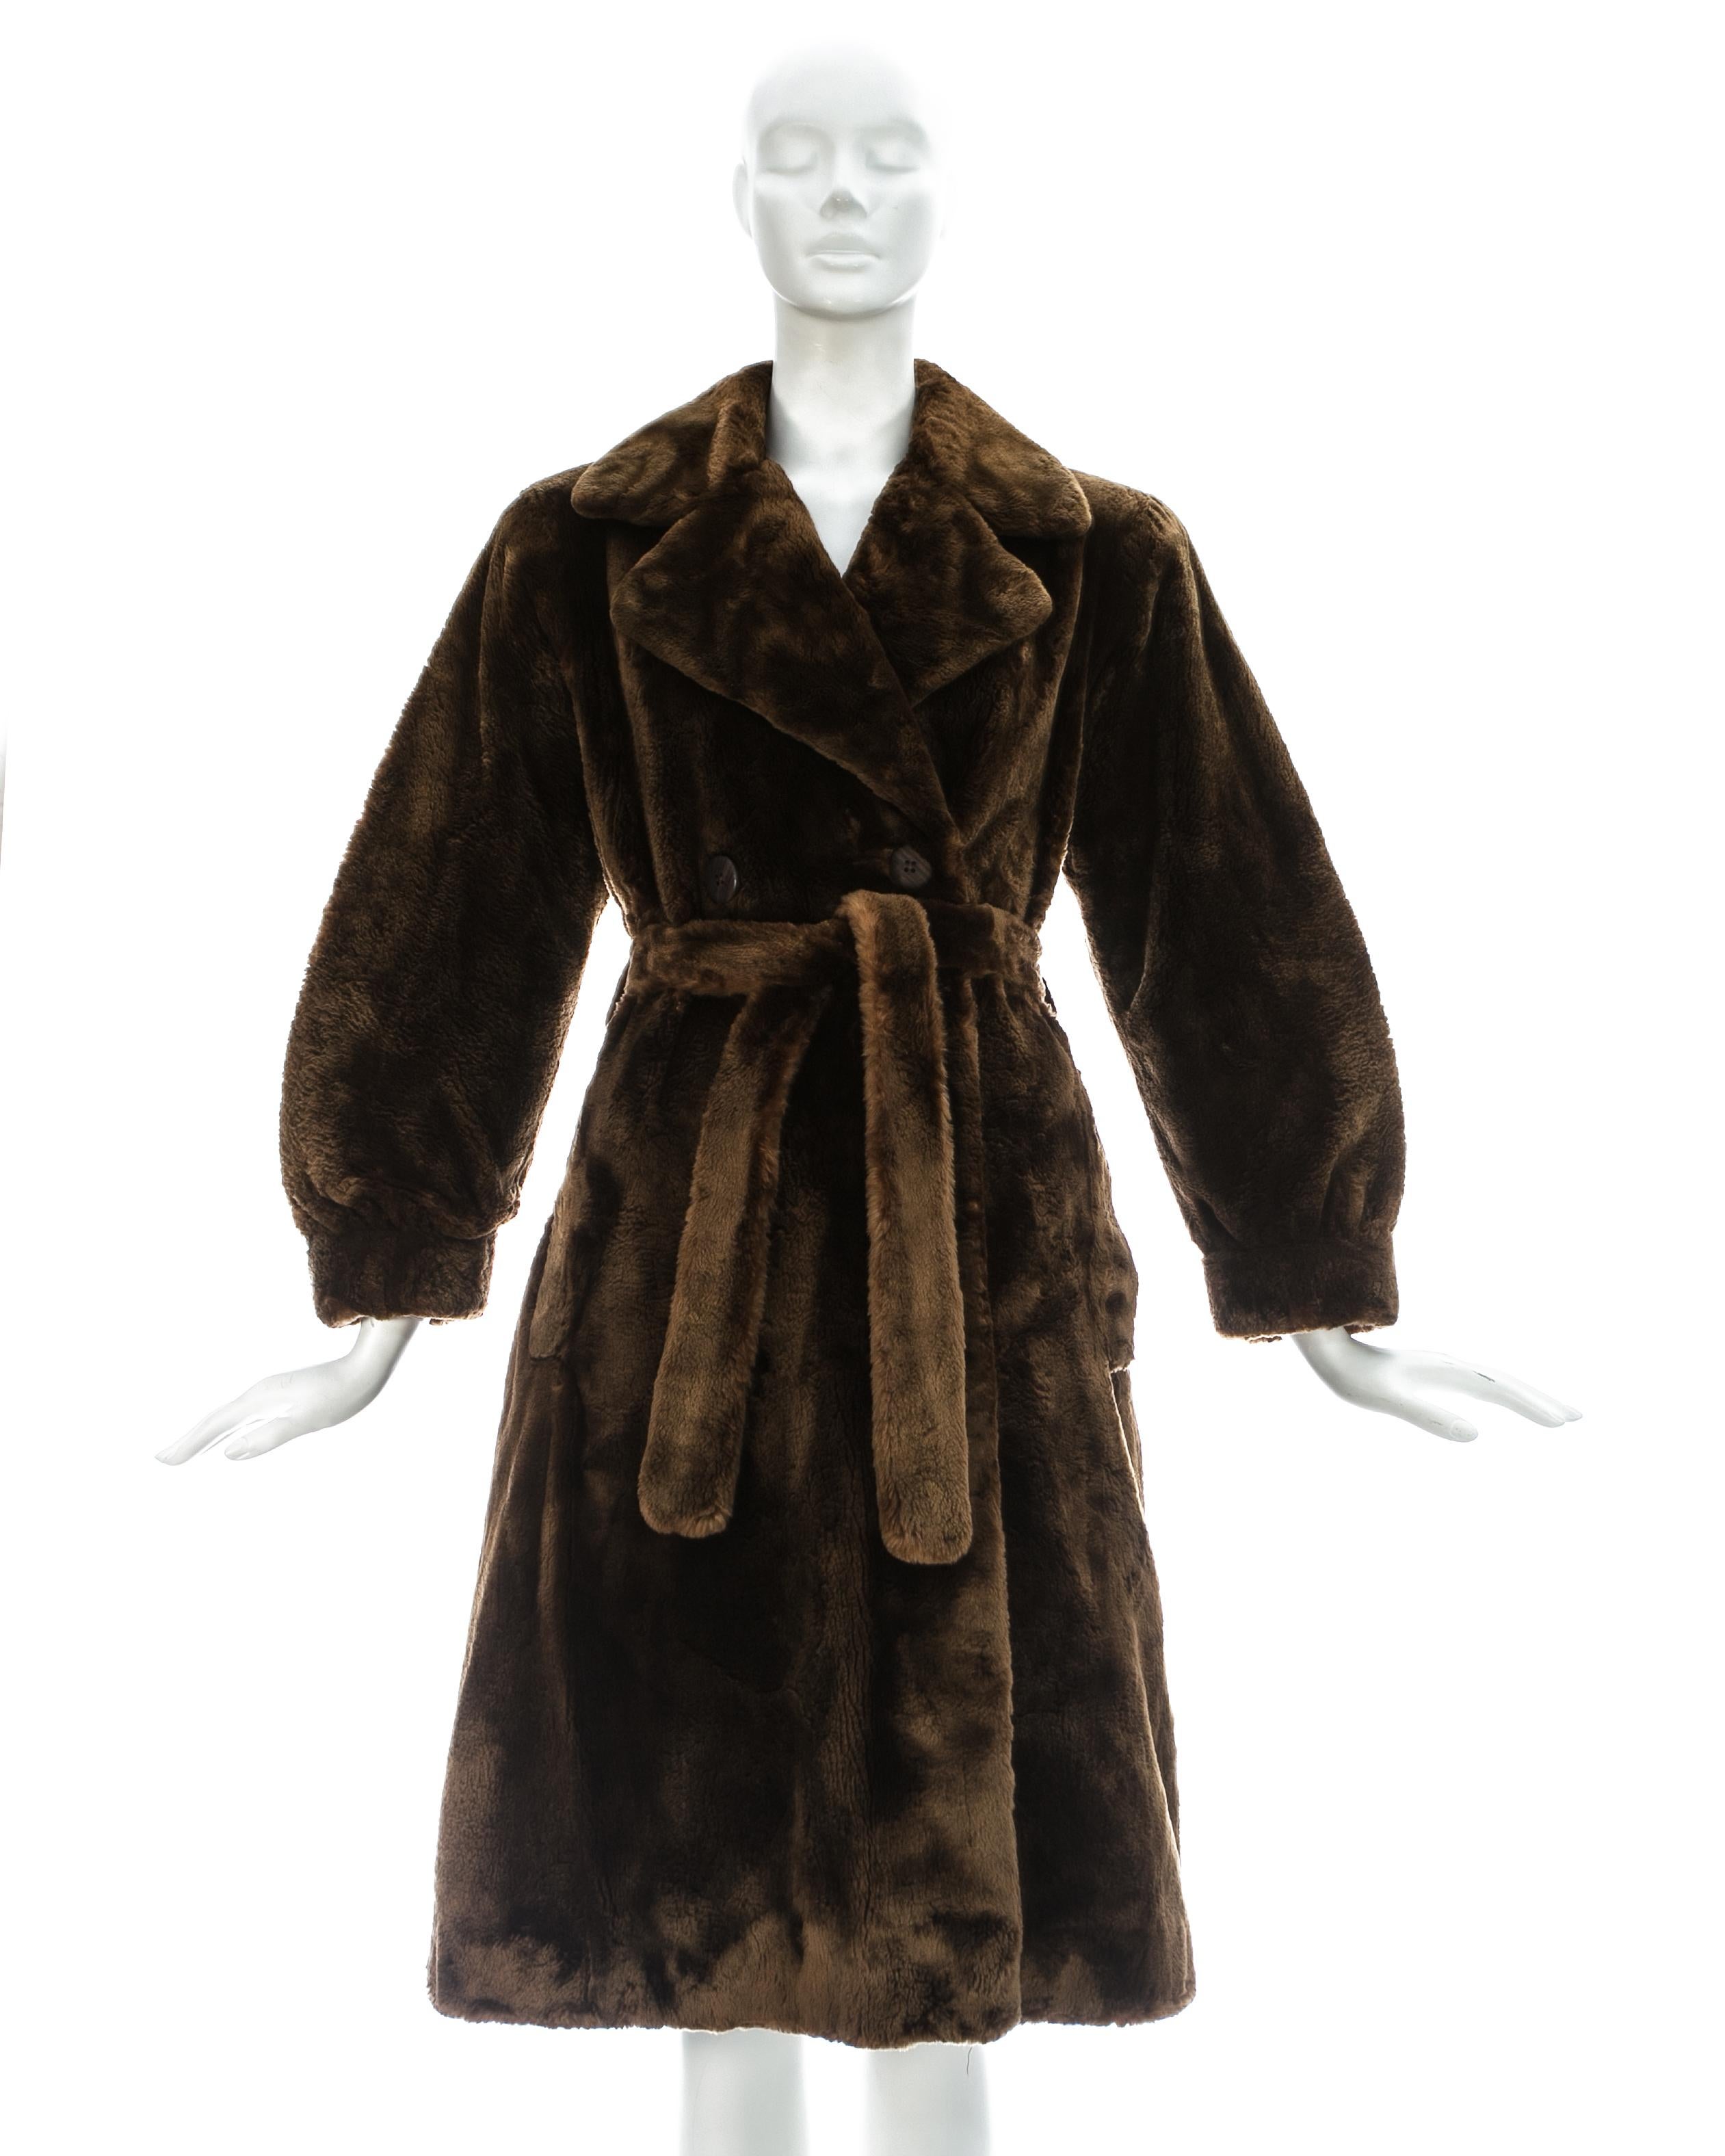 Yves Saint Laurent; chestnut brown sheared beaver fur coat with structured shoulders, silk lining, wooden buttons and matching belt. 

Haute Couture Fall-Winter 1985 